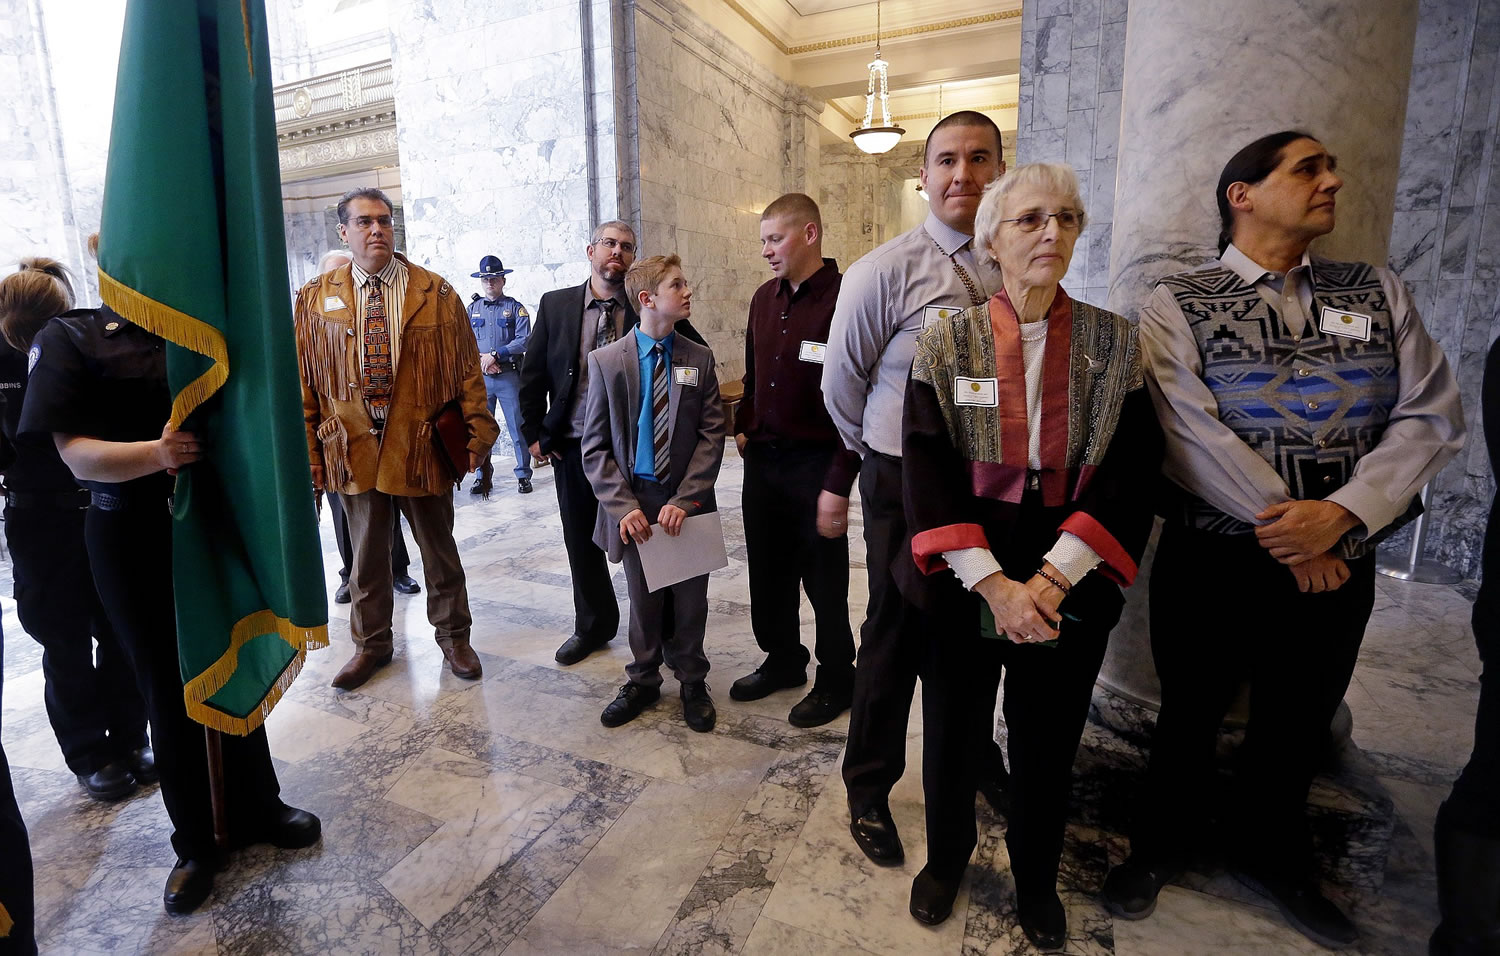 Award recipients stand outside the House Chamber as they wait to enter a joint session of the Washington state Legislature on Wednesday in Olympia. Medal of Valor recipients, from left, are Kevin Lenon, Quinn Nations, Brantly Stupey and Willy Harper and Medal of Merit recipients Gretchen Schodde, second right, and brothers Tobin, right, and Willie Frank, who accepted on behalf of their father Billy Frank Jr. Gov.